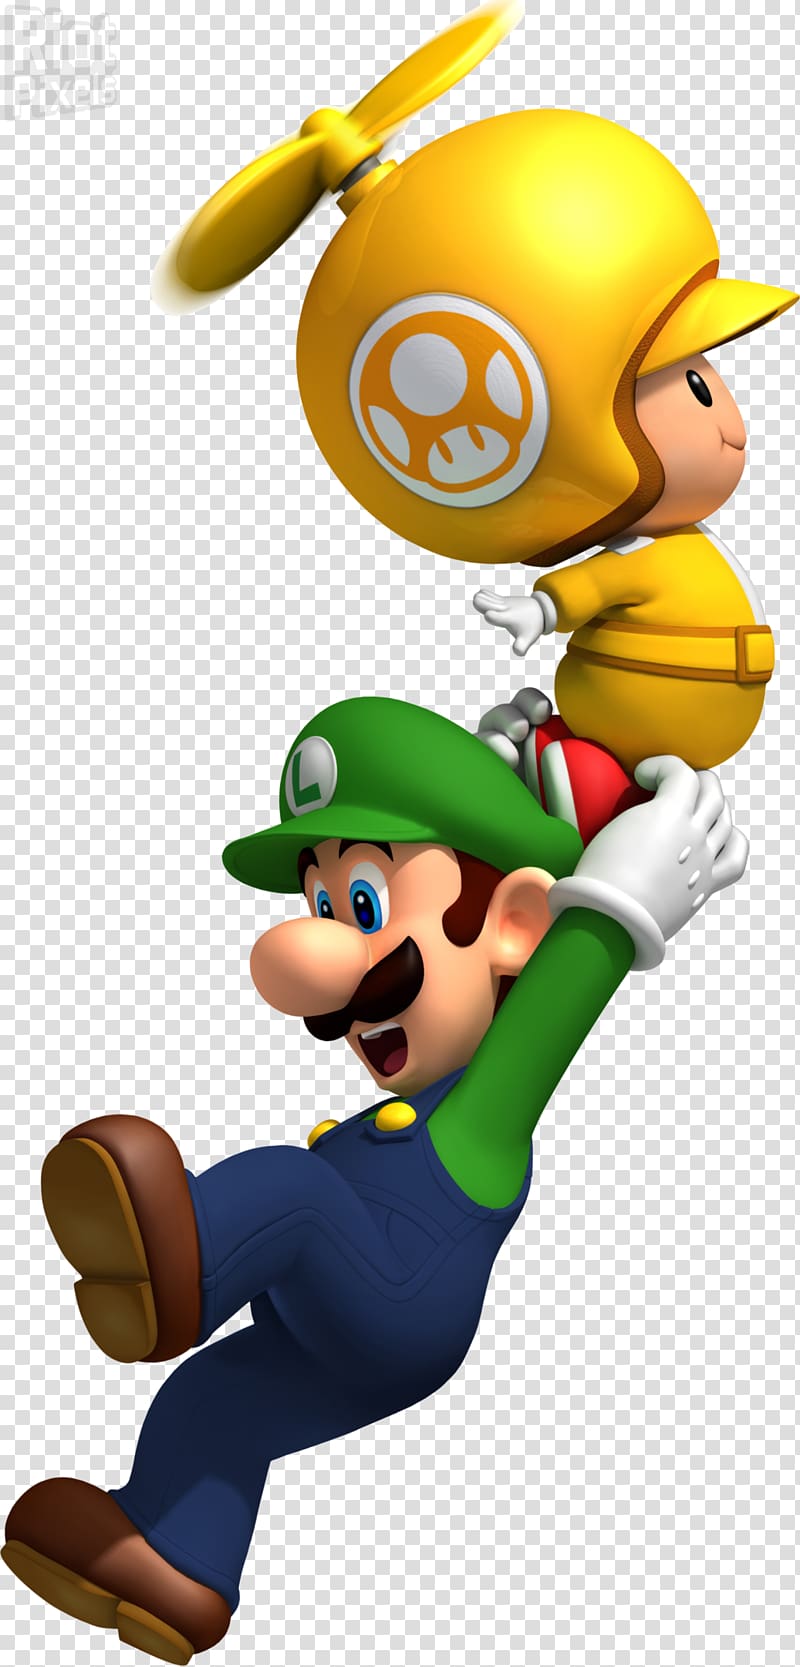 Luigi and Super Mario Character illustration, New Super Mario Bros. Wii New Super Mario Bros. 2, bros. transparent background PNG clipart